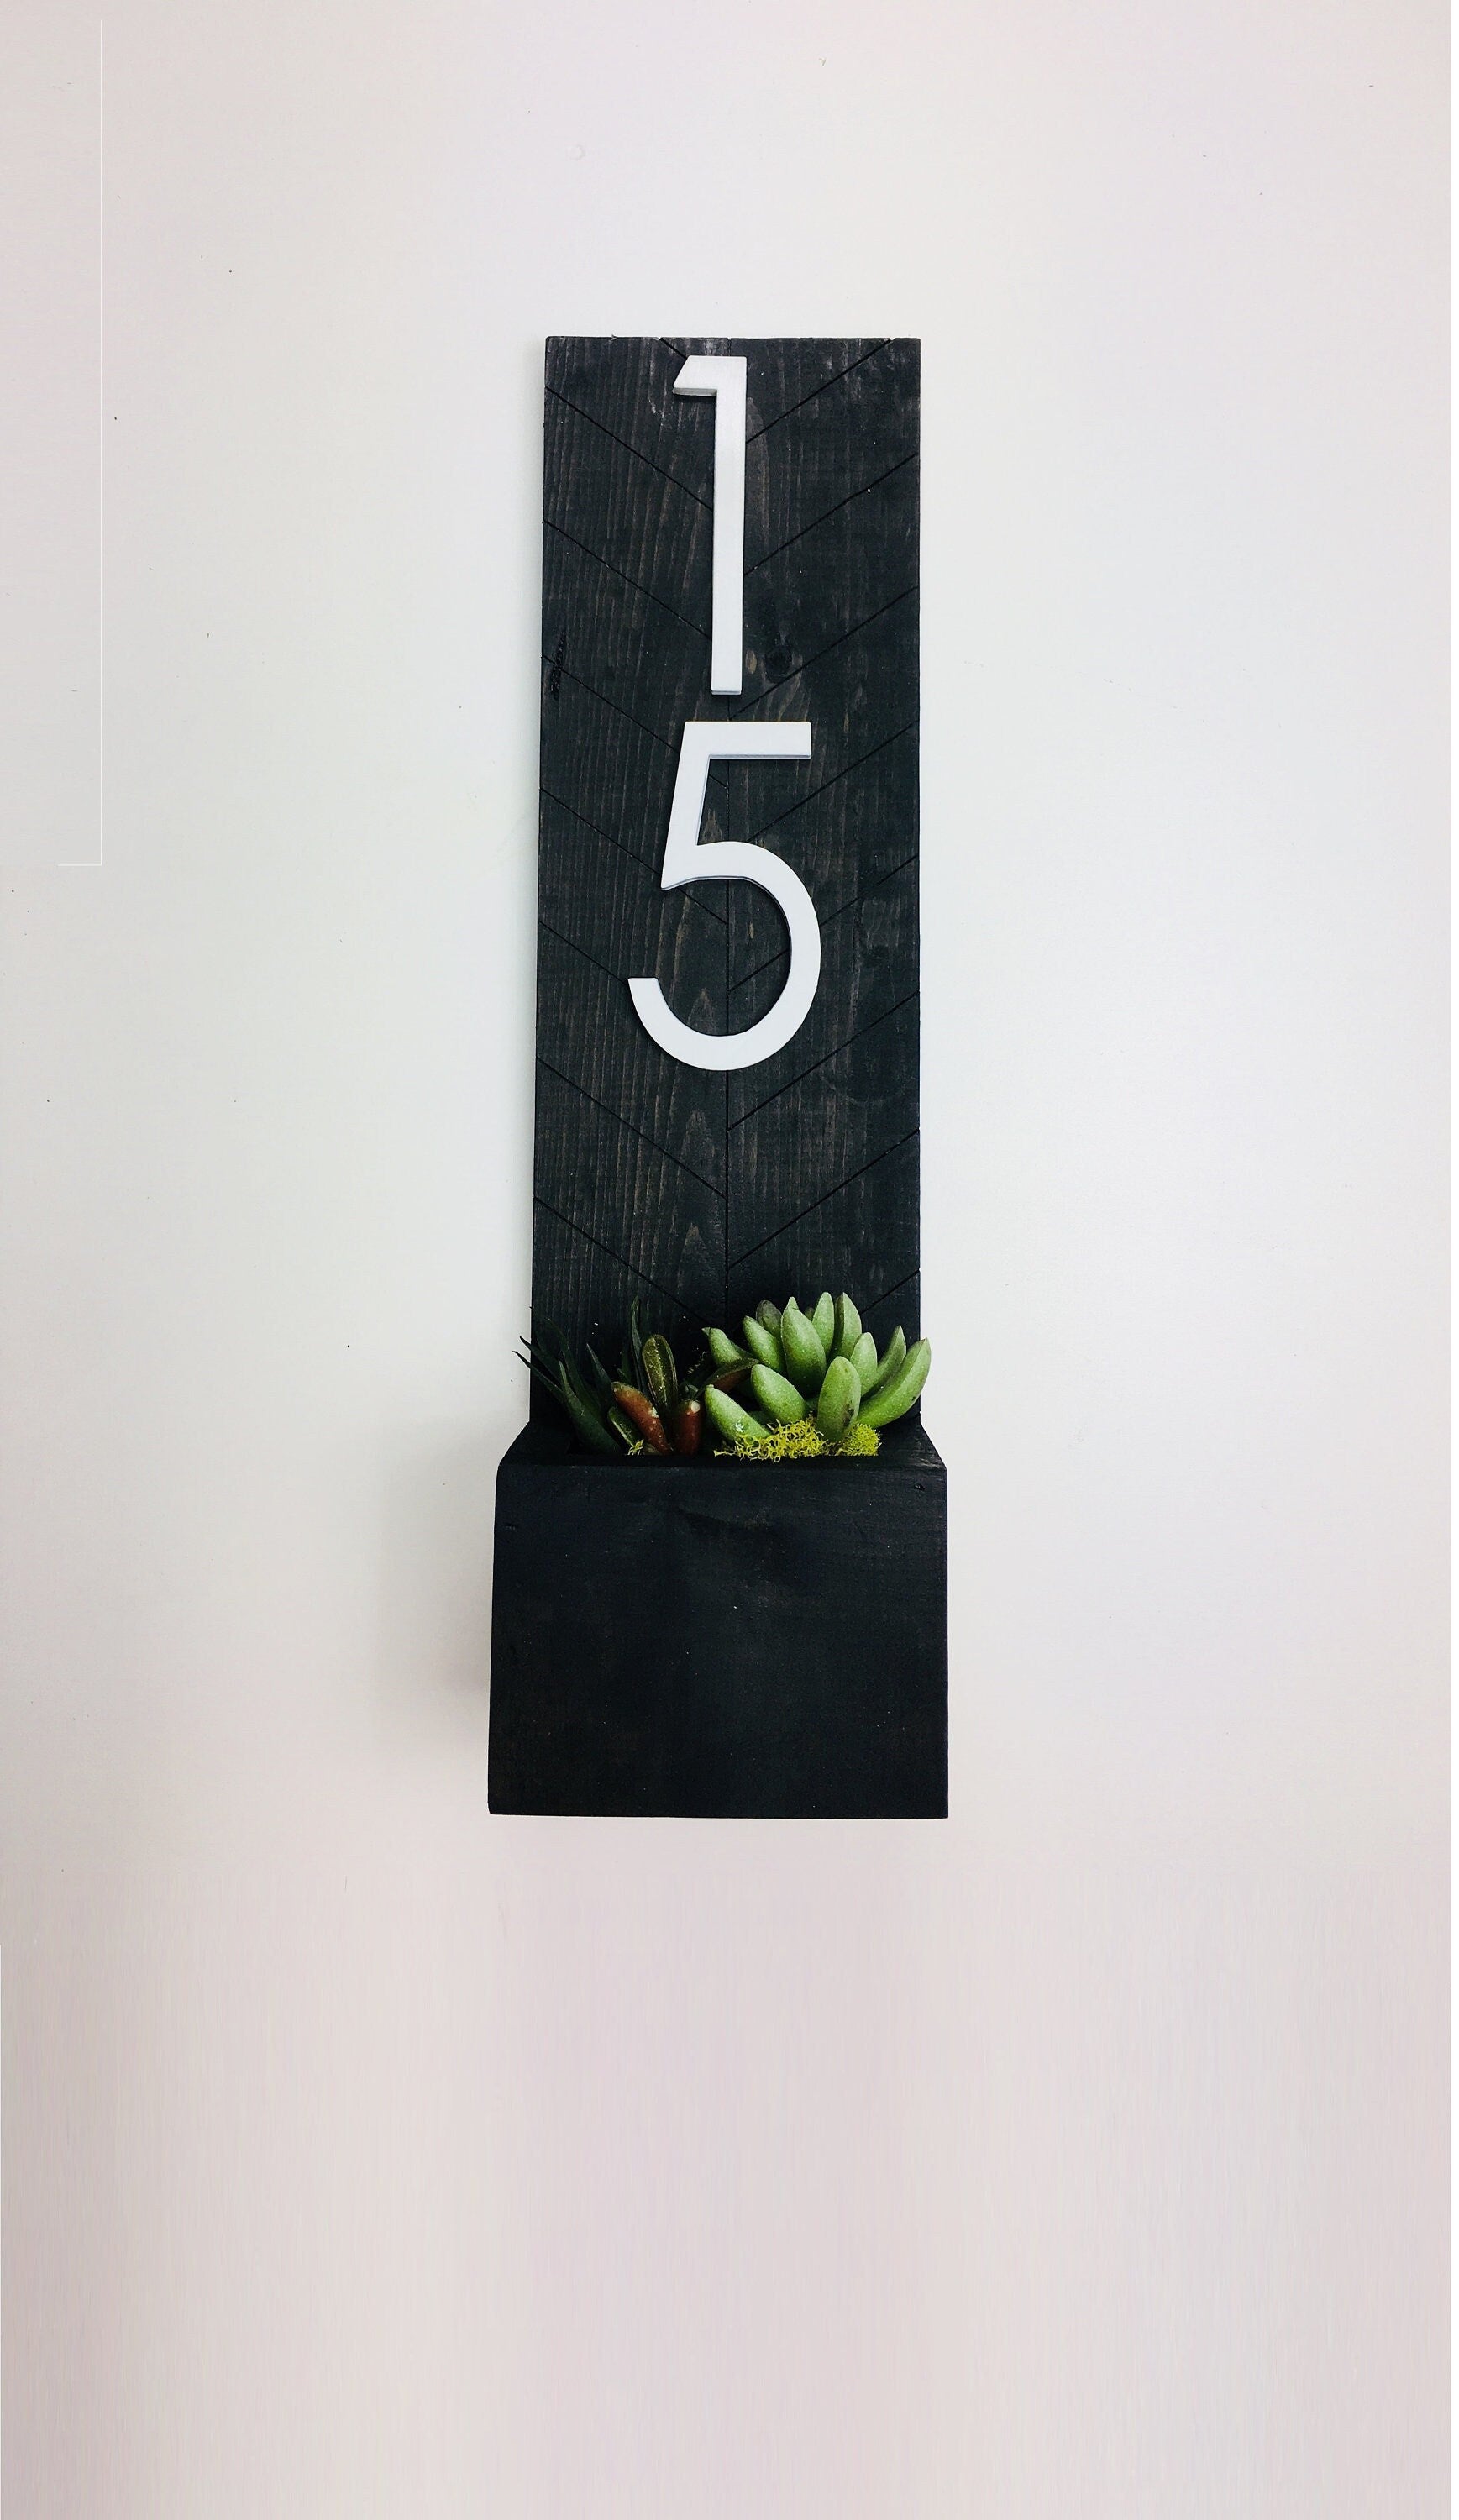 Pierce personalized house number plaque - vertical sign with custom vertical address numbers modern vertical house number sign - sleek